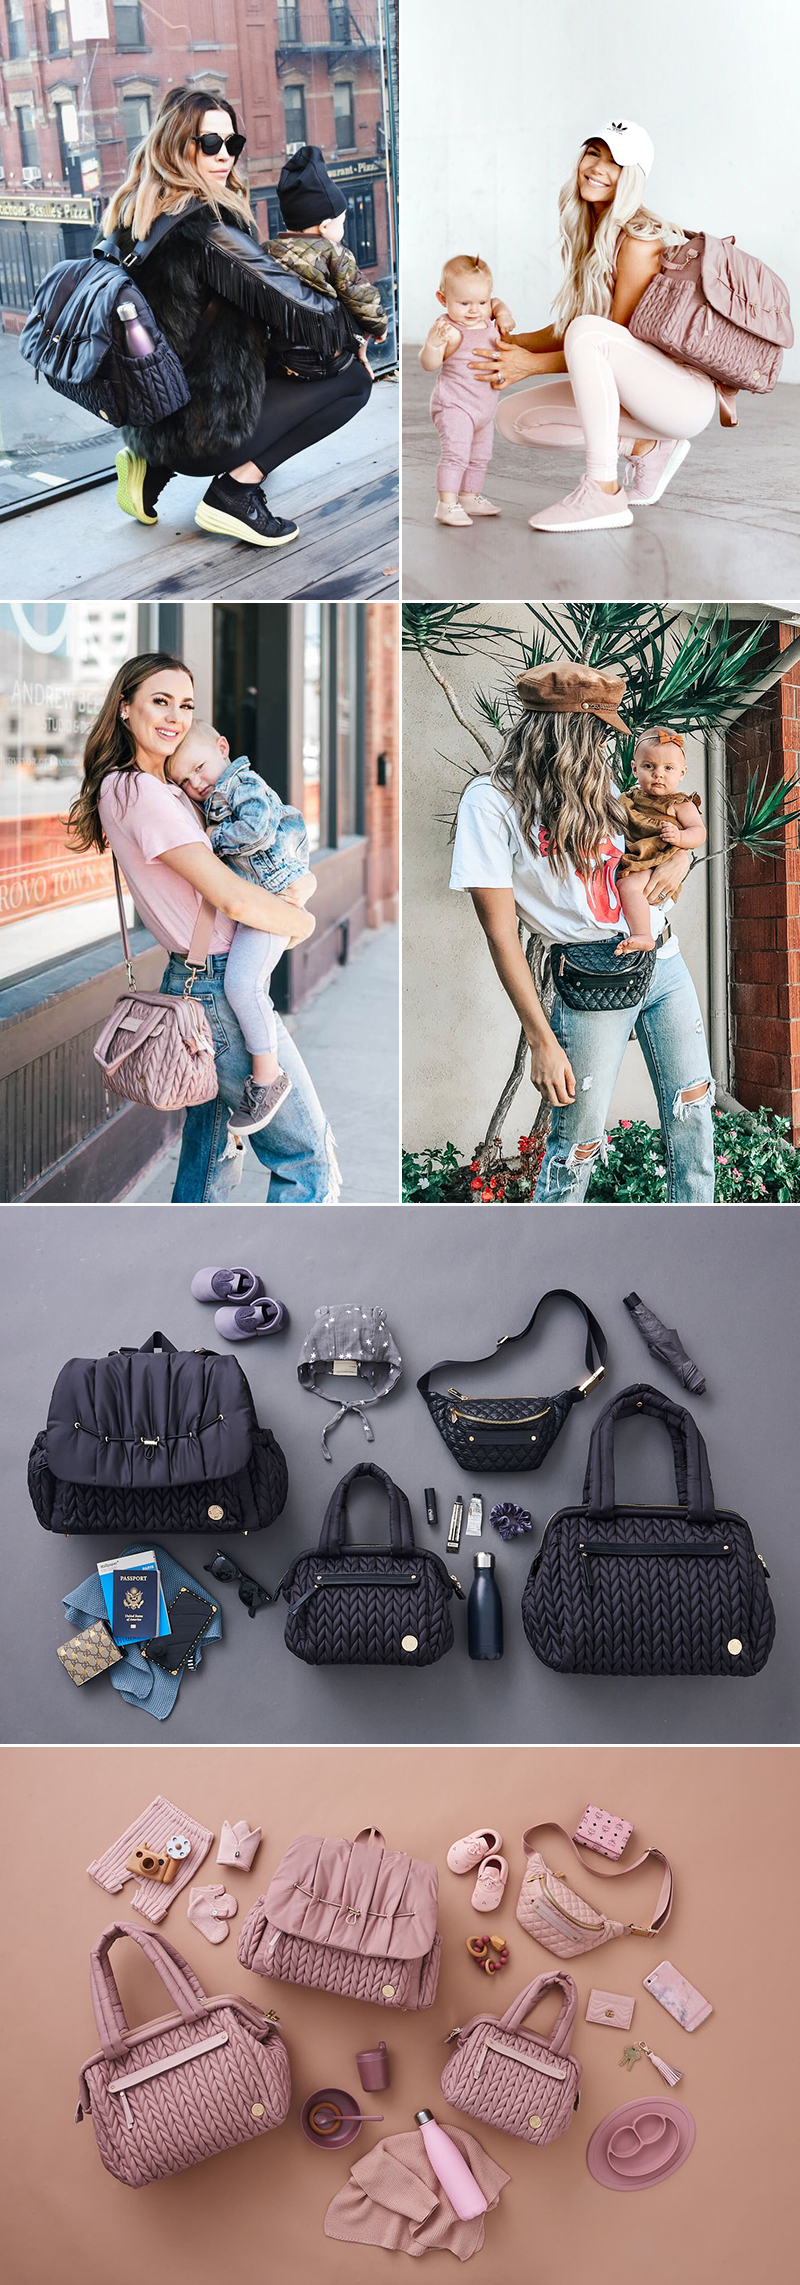 Stylish Diaper Bags Fashion Moms Will Actually Love - 6 Brands You